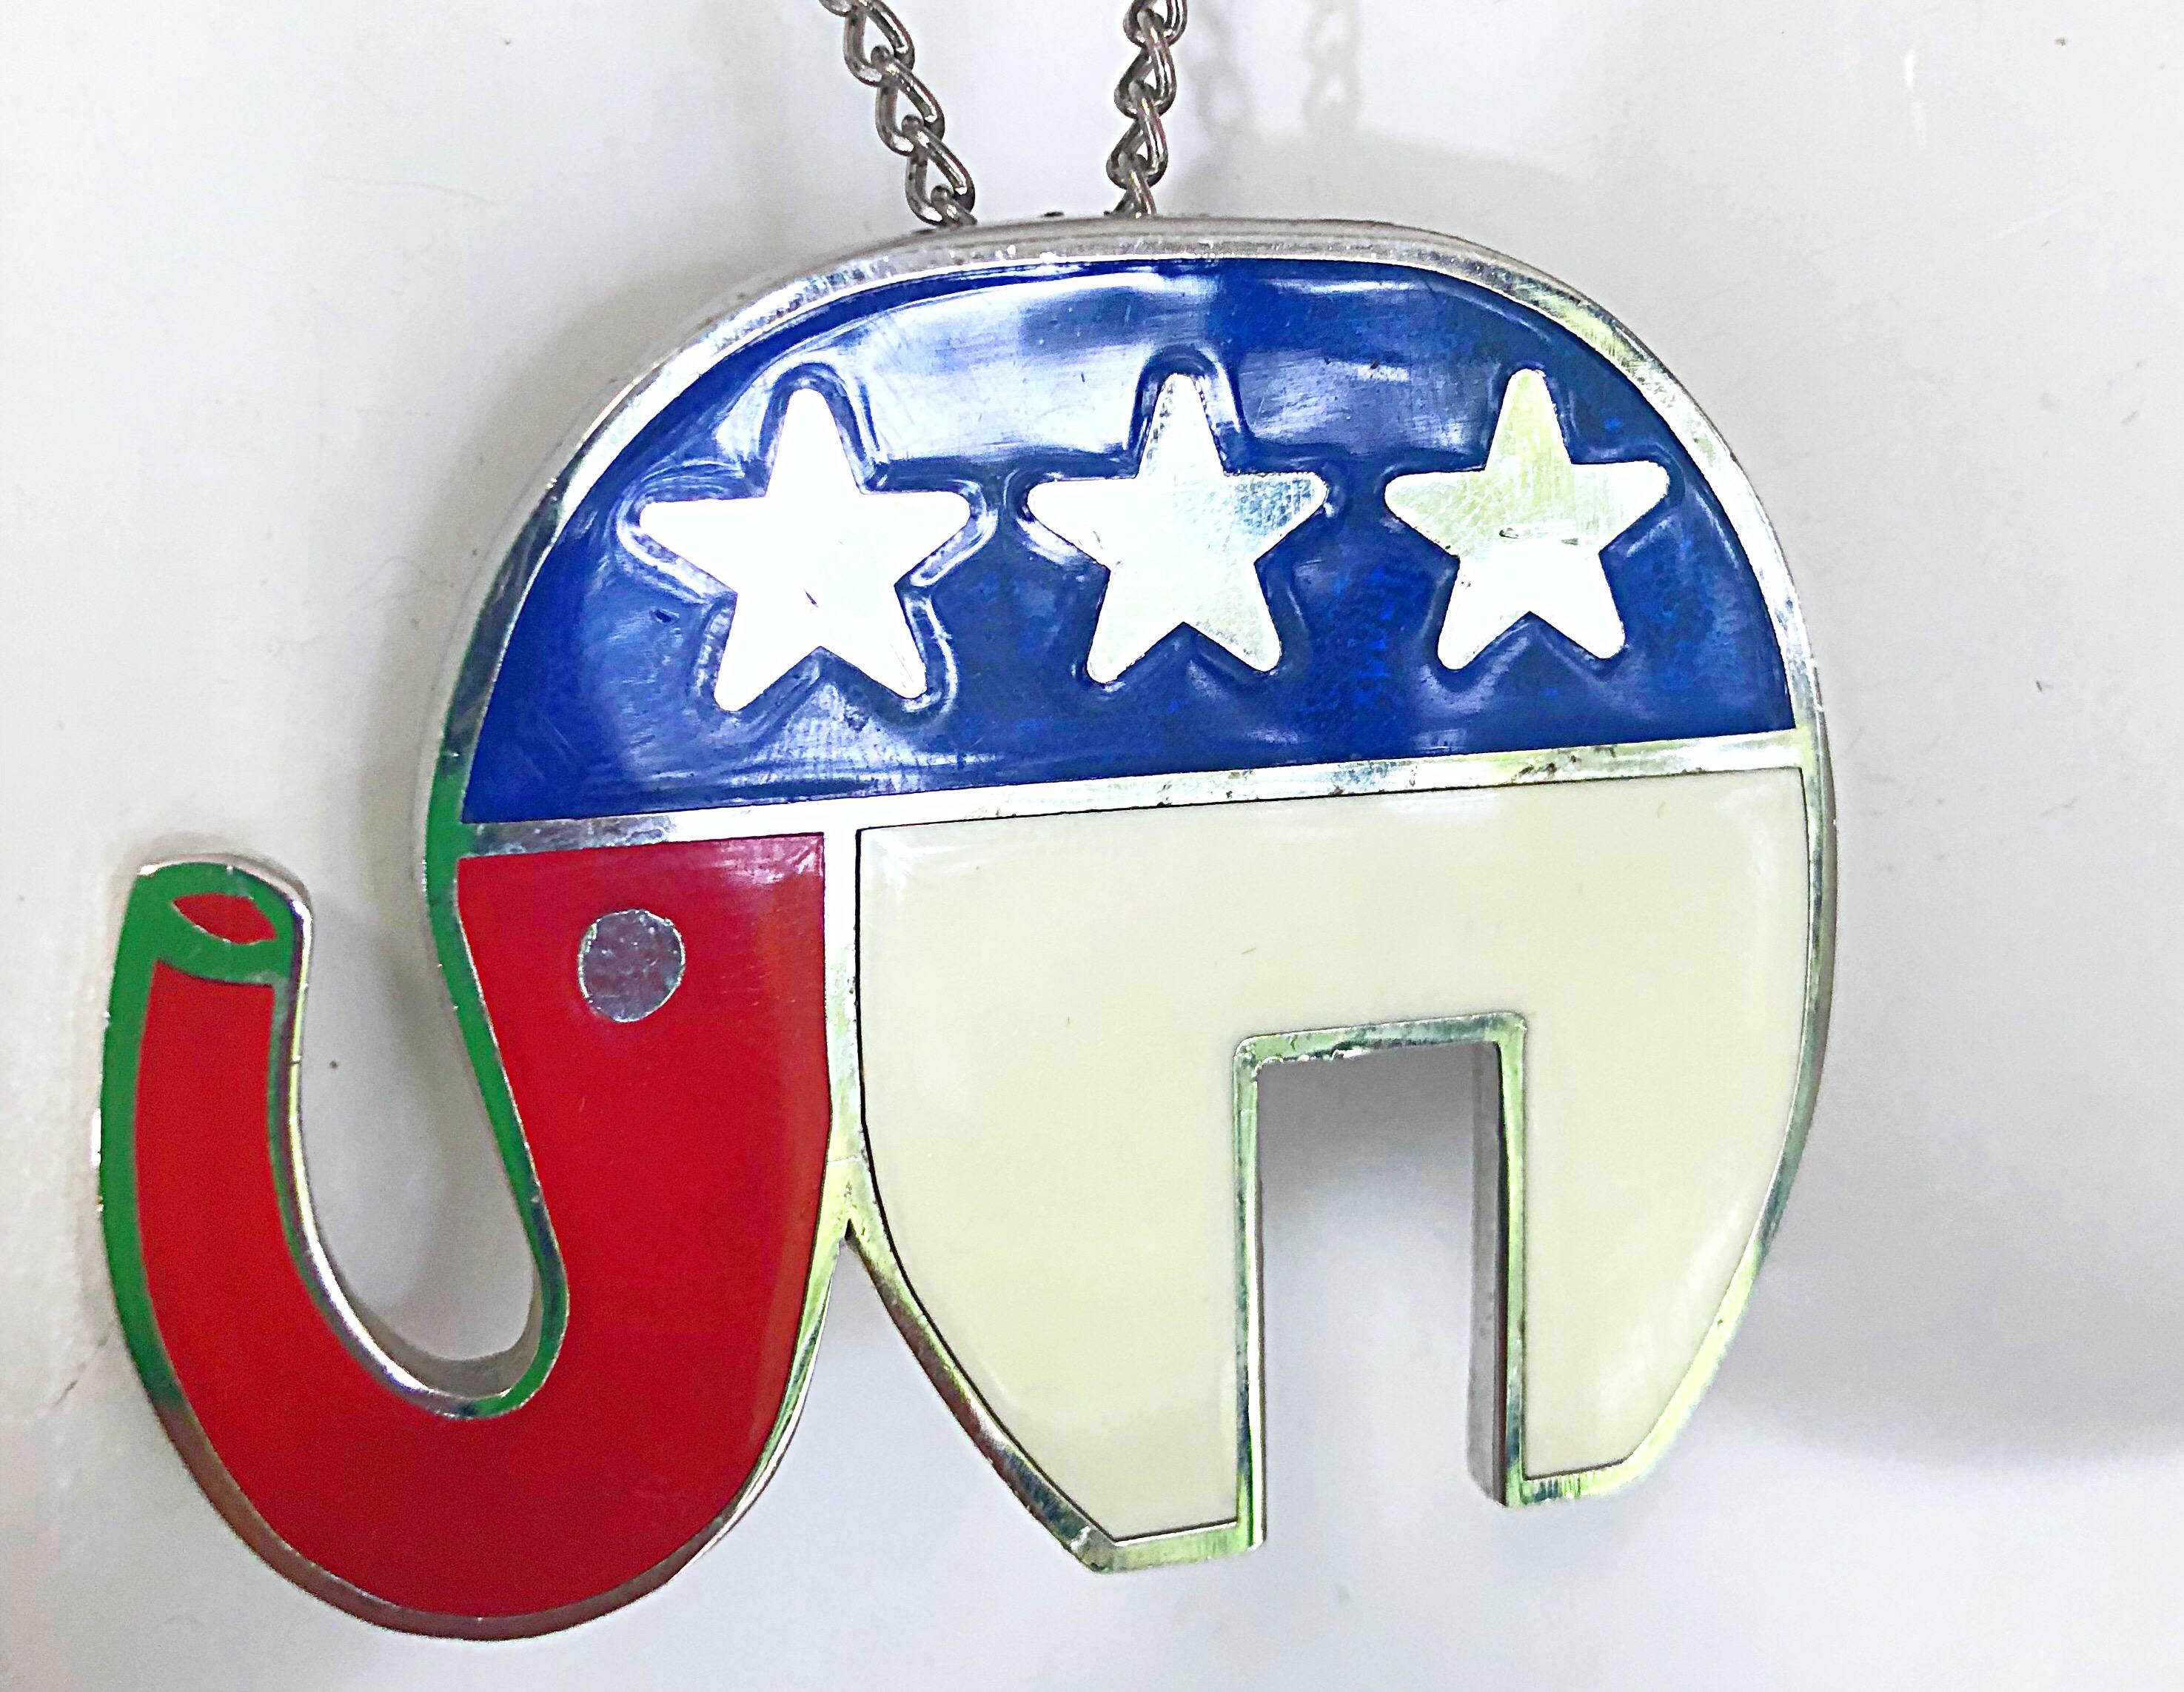 Rare vintage HATTIE CARNEGIE large patriotic novelty Republican Party elephant necklace OR brooch! Features red, white and blue with silver stars. The back also features a pin closure to be used as a brooch (chain easily comes off). Signed back. In